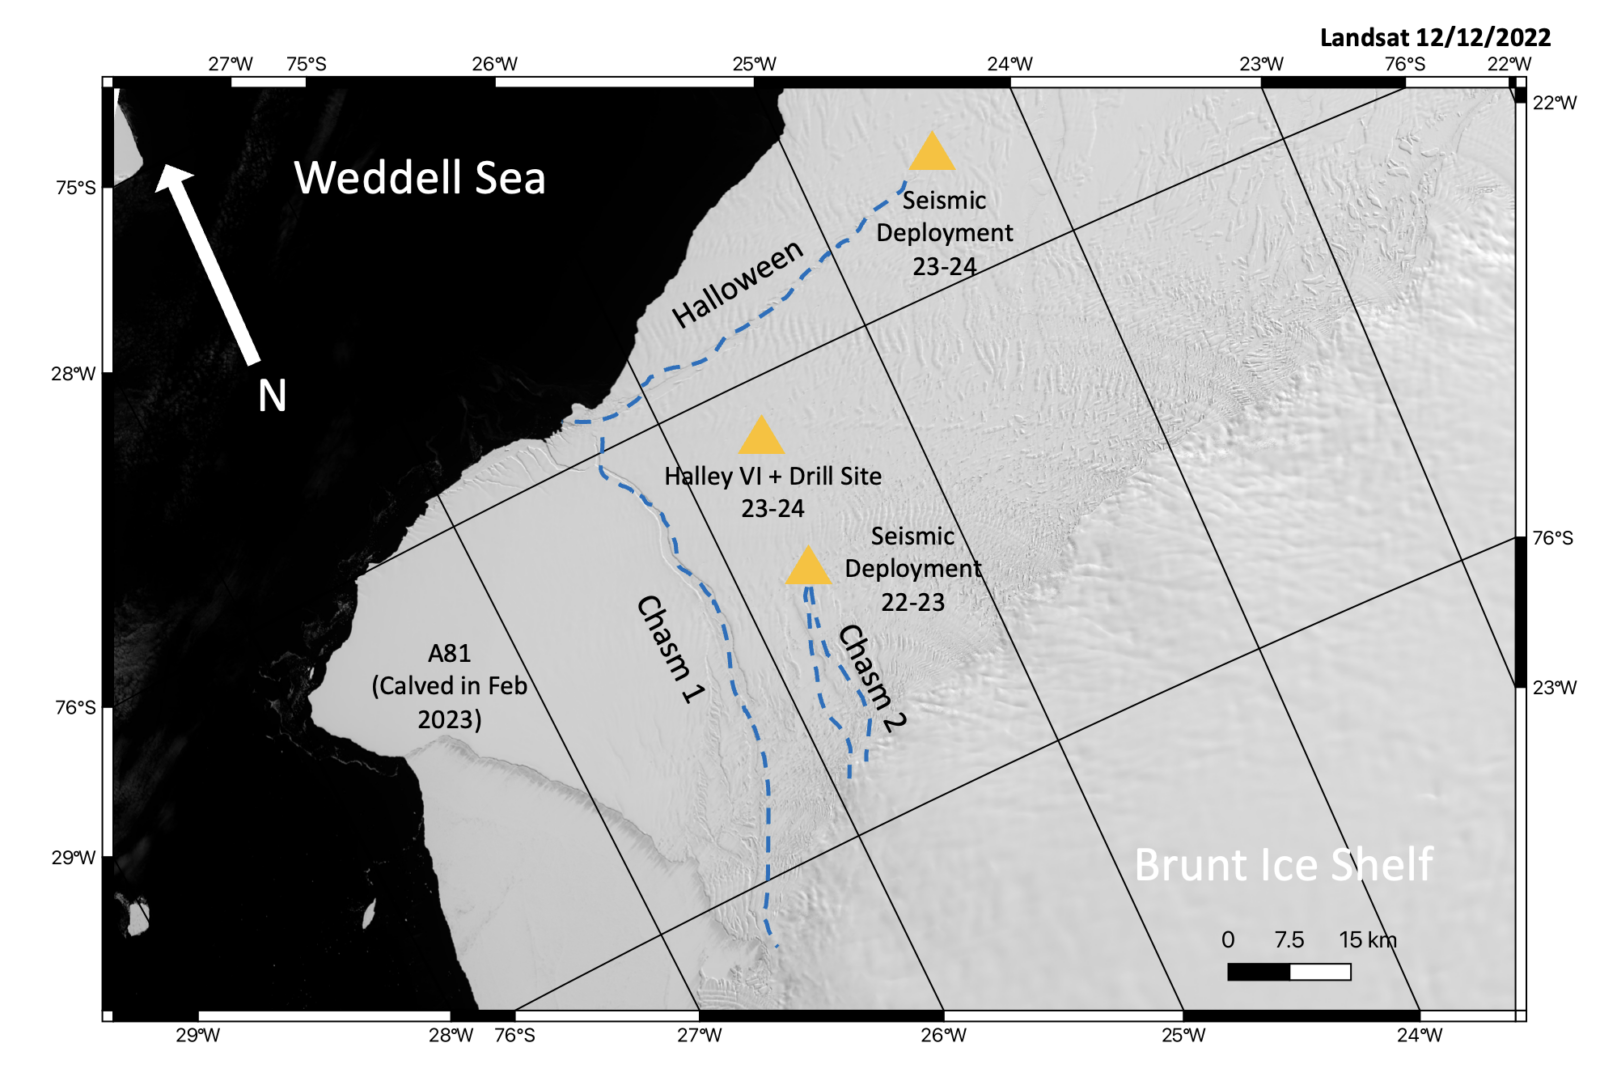 A map showing the Weddell Sea and the Brunt Ice Shelf with the chasm 1 and 2 and Halley VI close to the two huge calved icebergs.